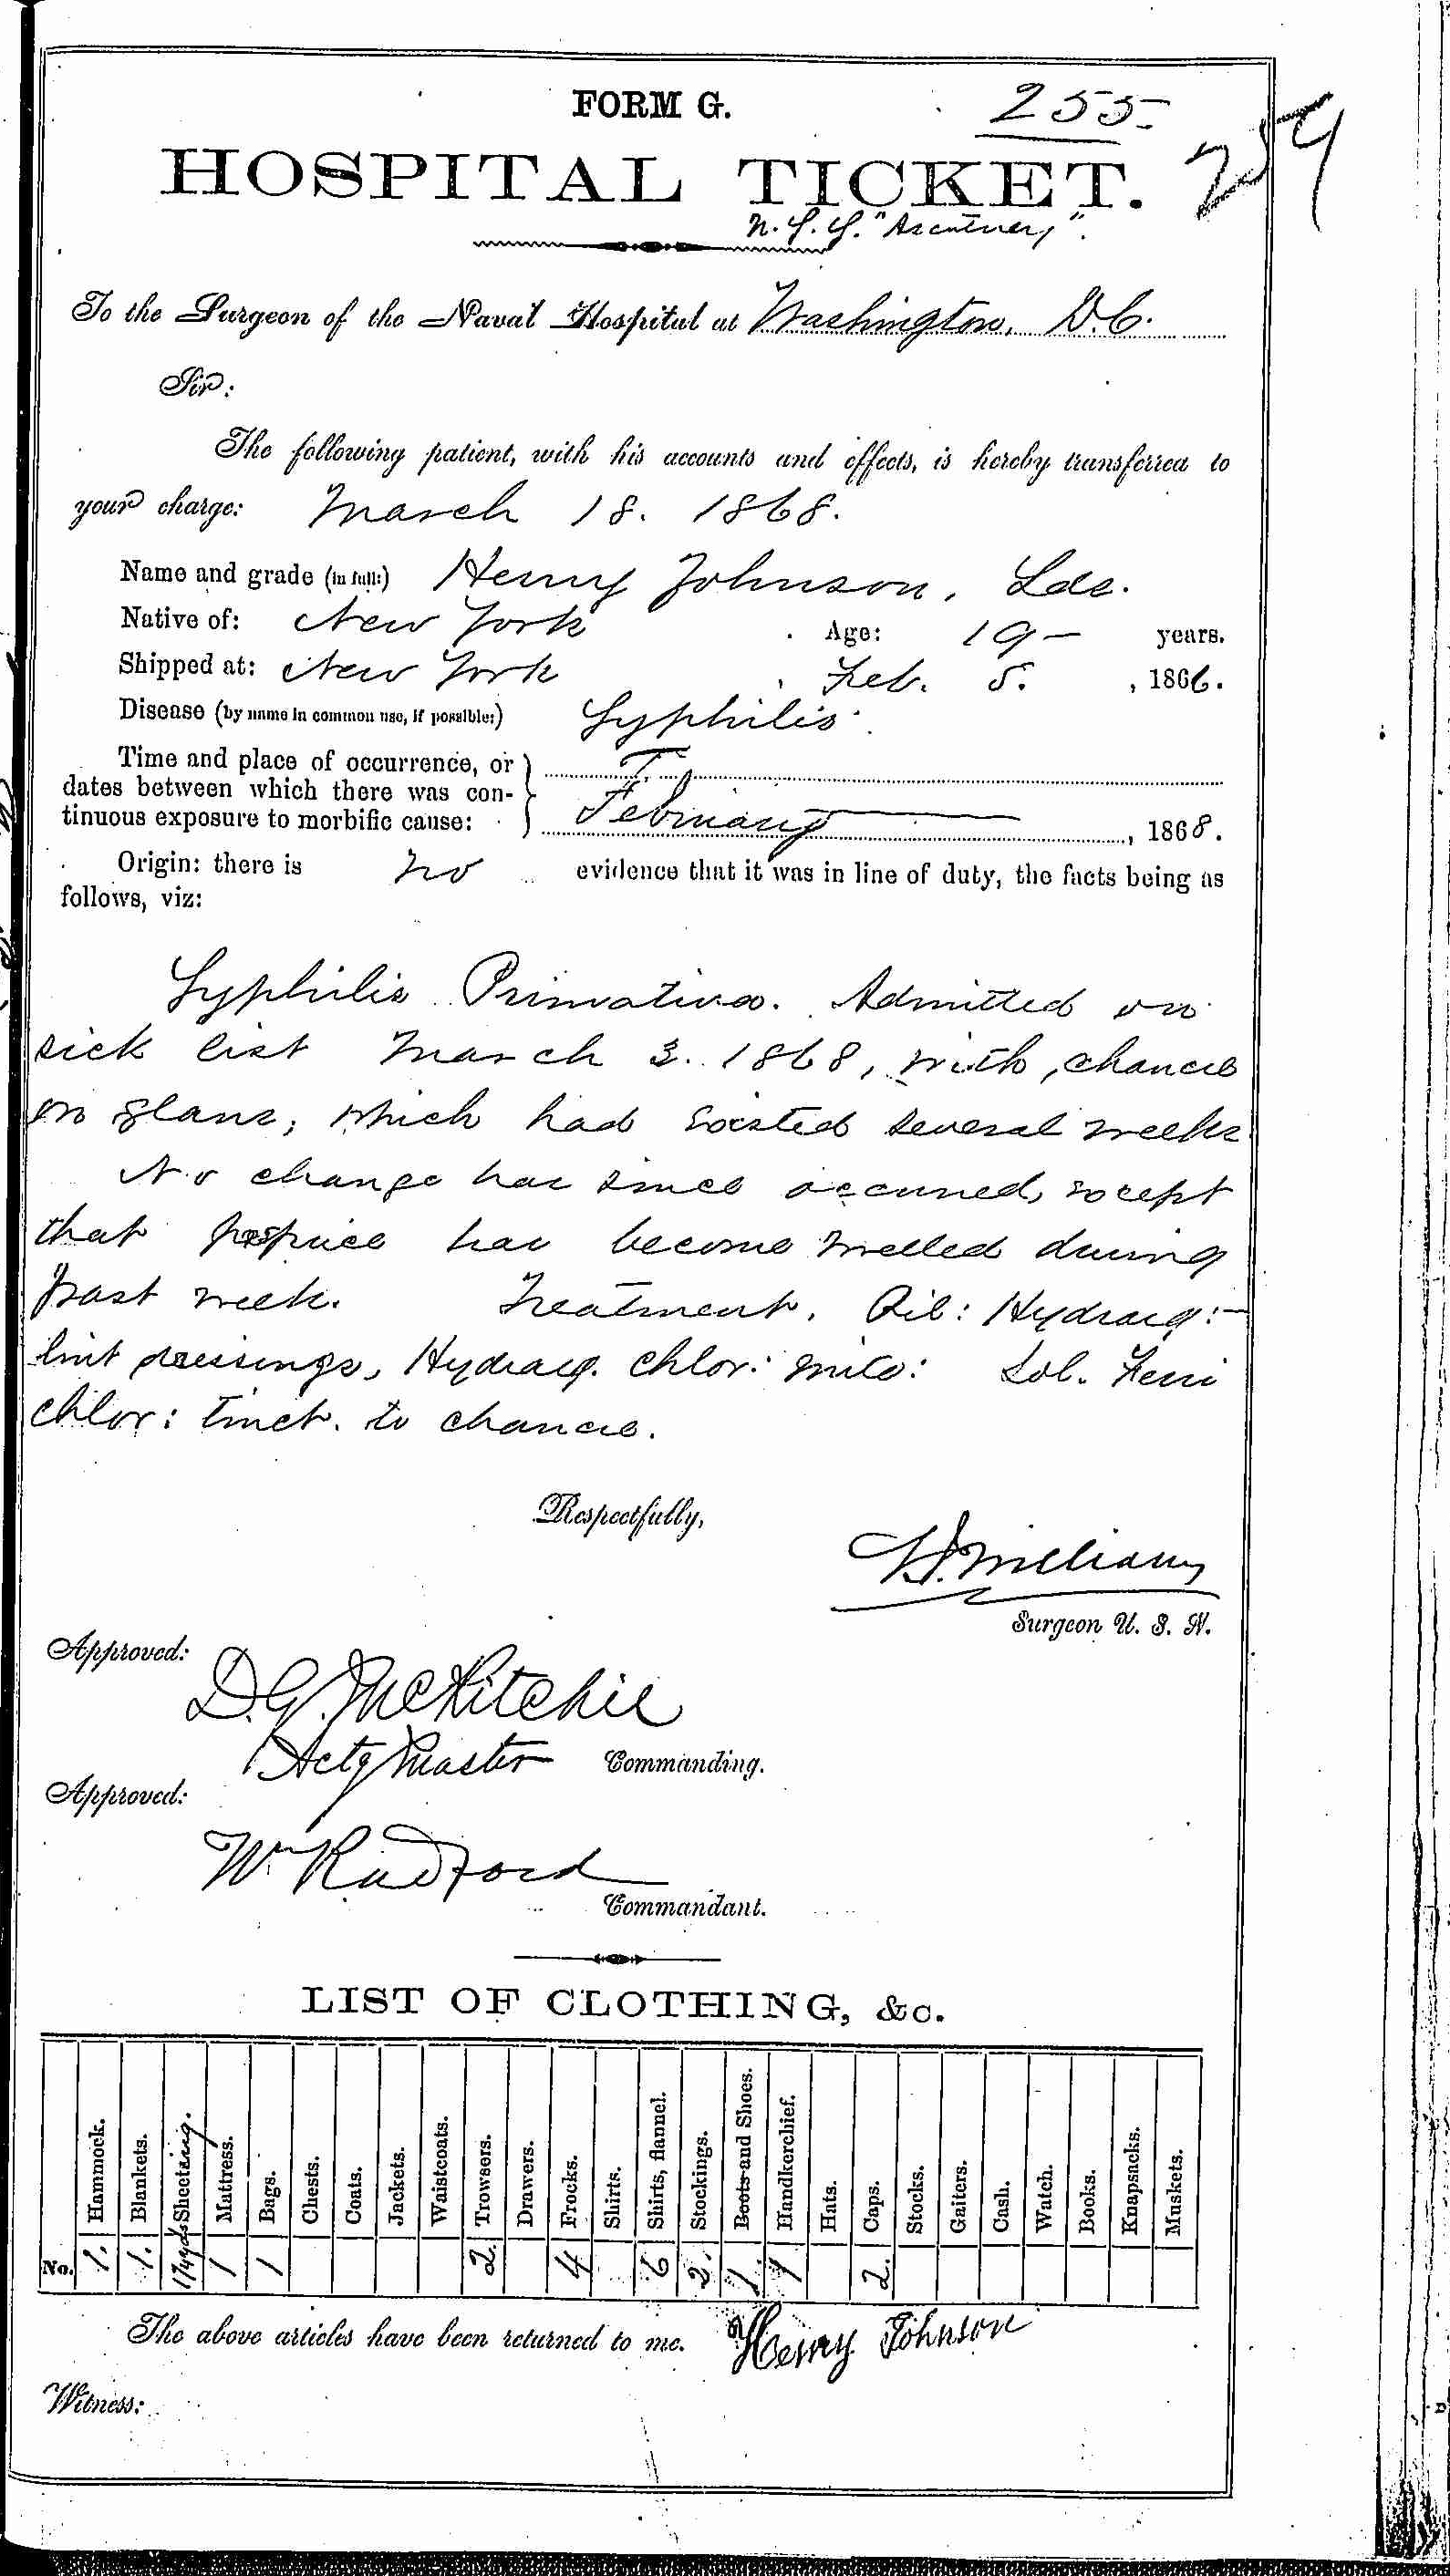 Entry for Henry Johnson (page 1 of 2) in the log Hospital Tickets and Case Papers - Naval Hospital - Washington, D.C. - 1866-68